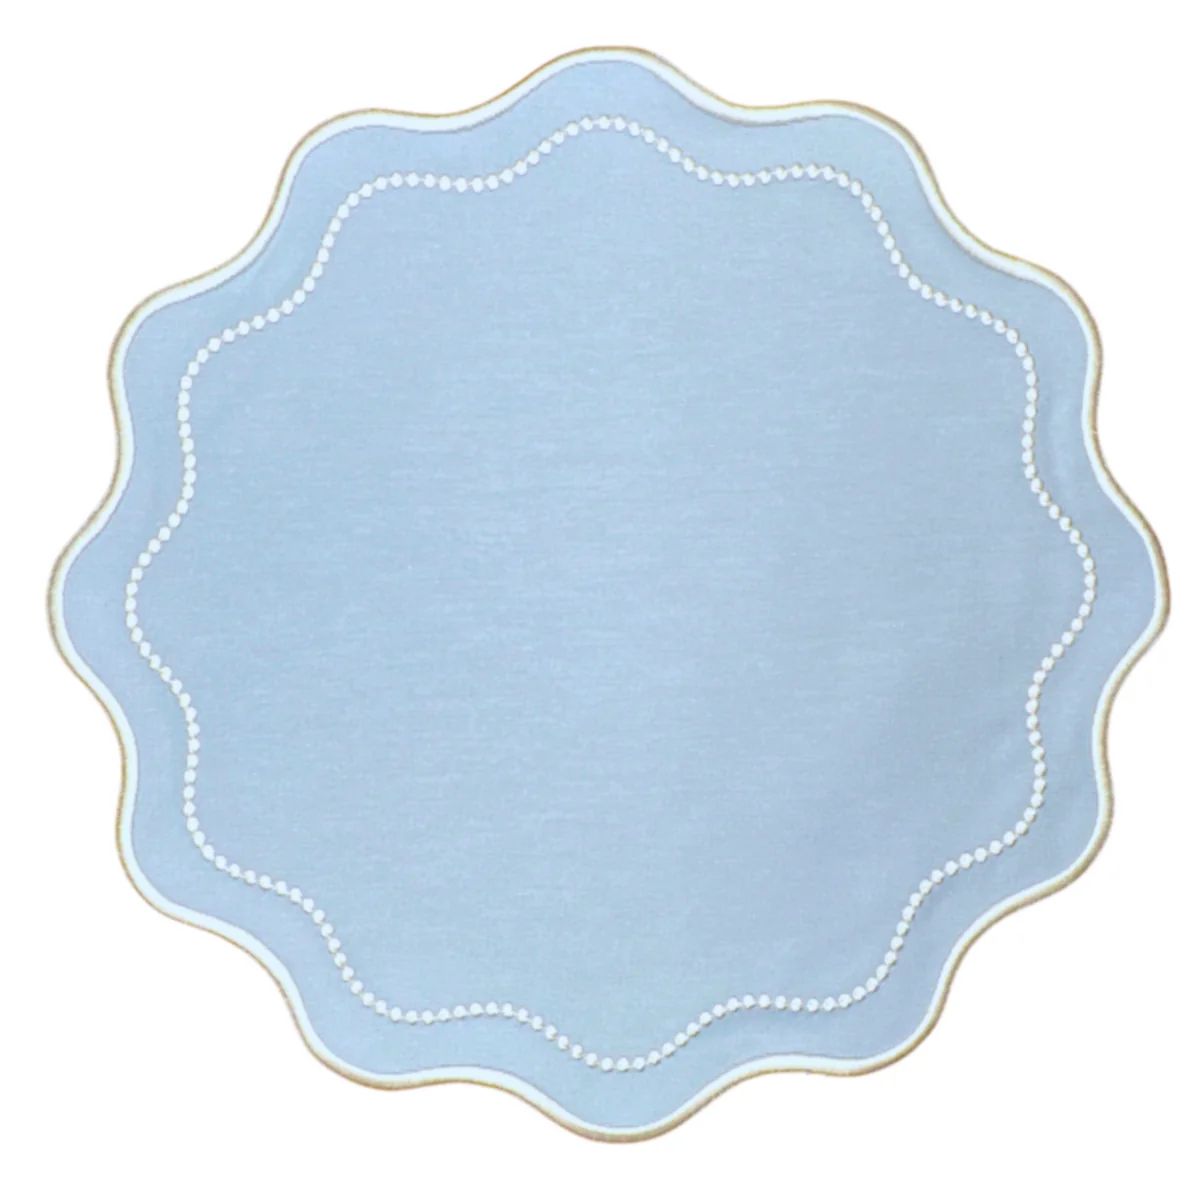 Waverly Placemat in Blue, Set of 4 | Over The Moon